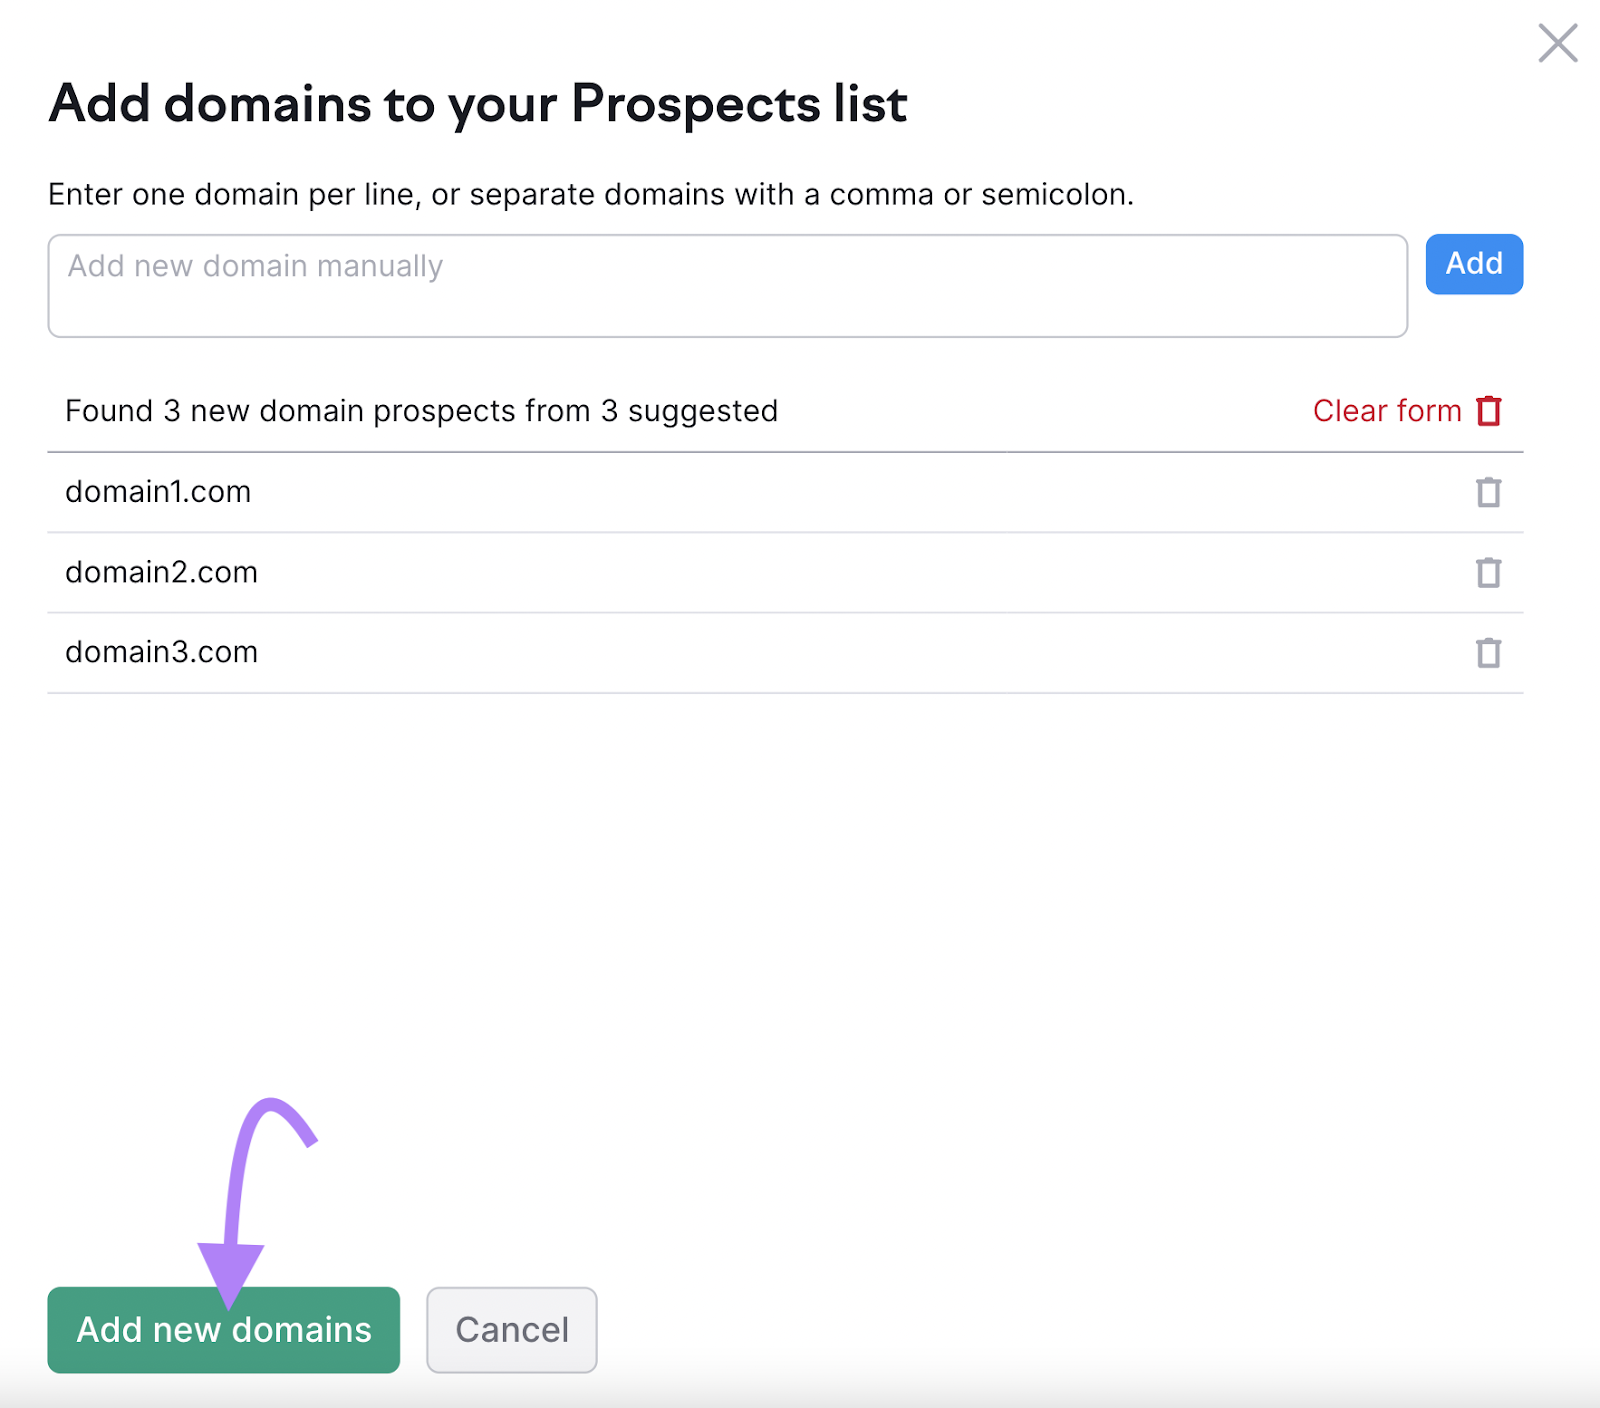 "Add domains to your Prospects list" model   successful  Link Building Tool